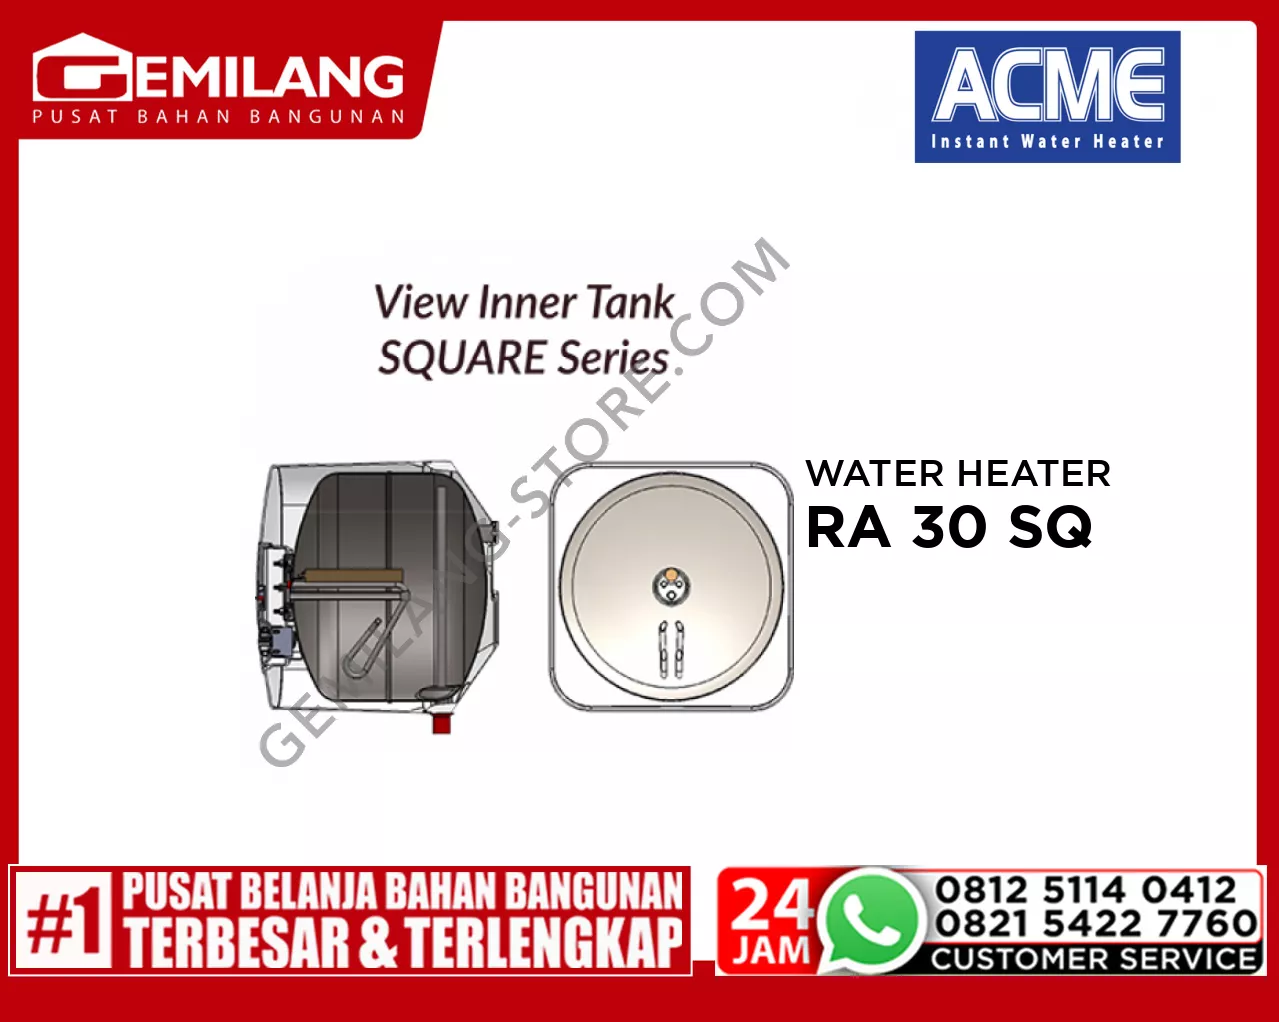 AMORE WATER HEATER RA 30 SQ